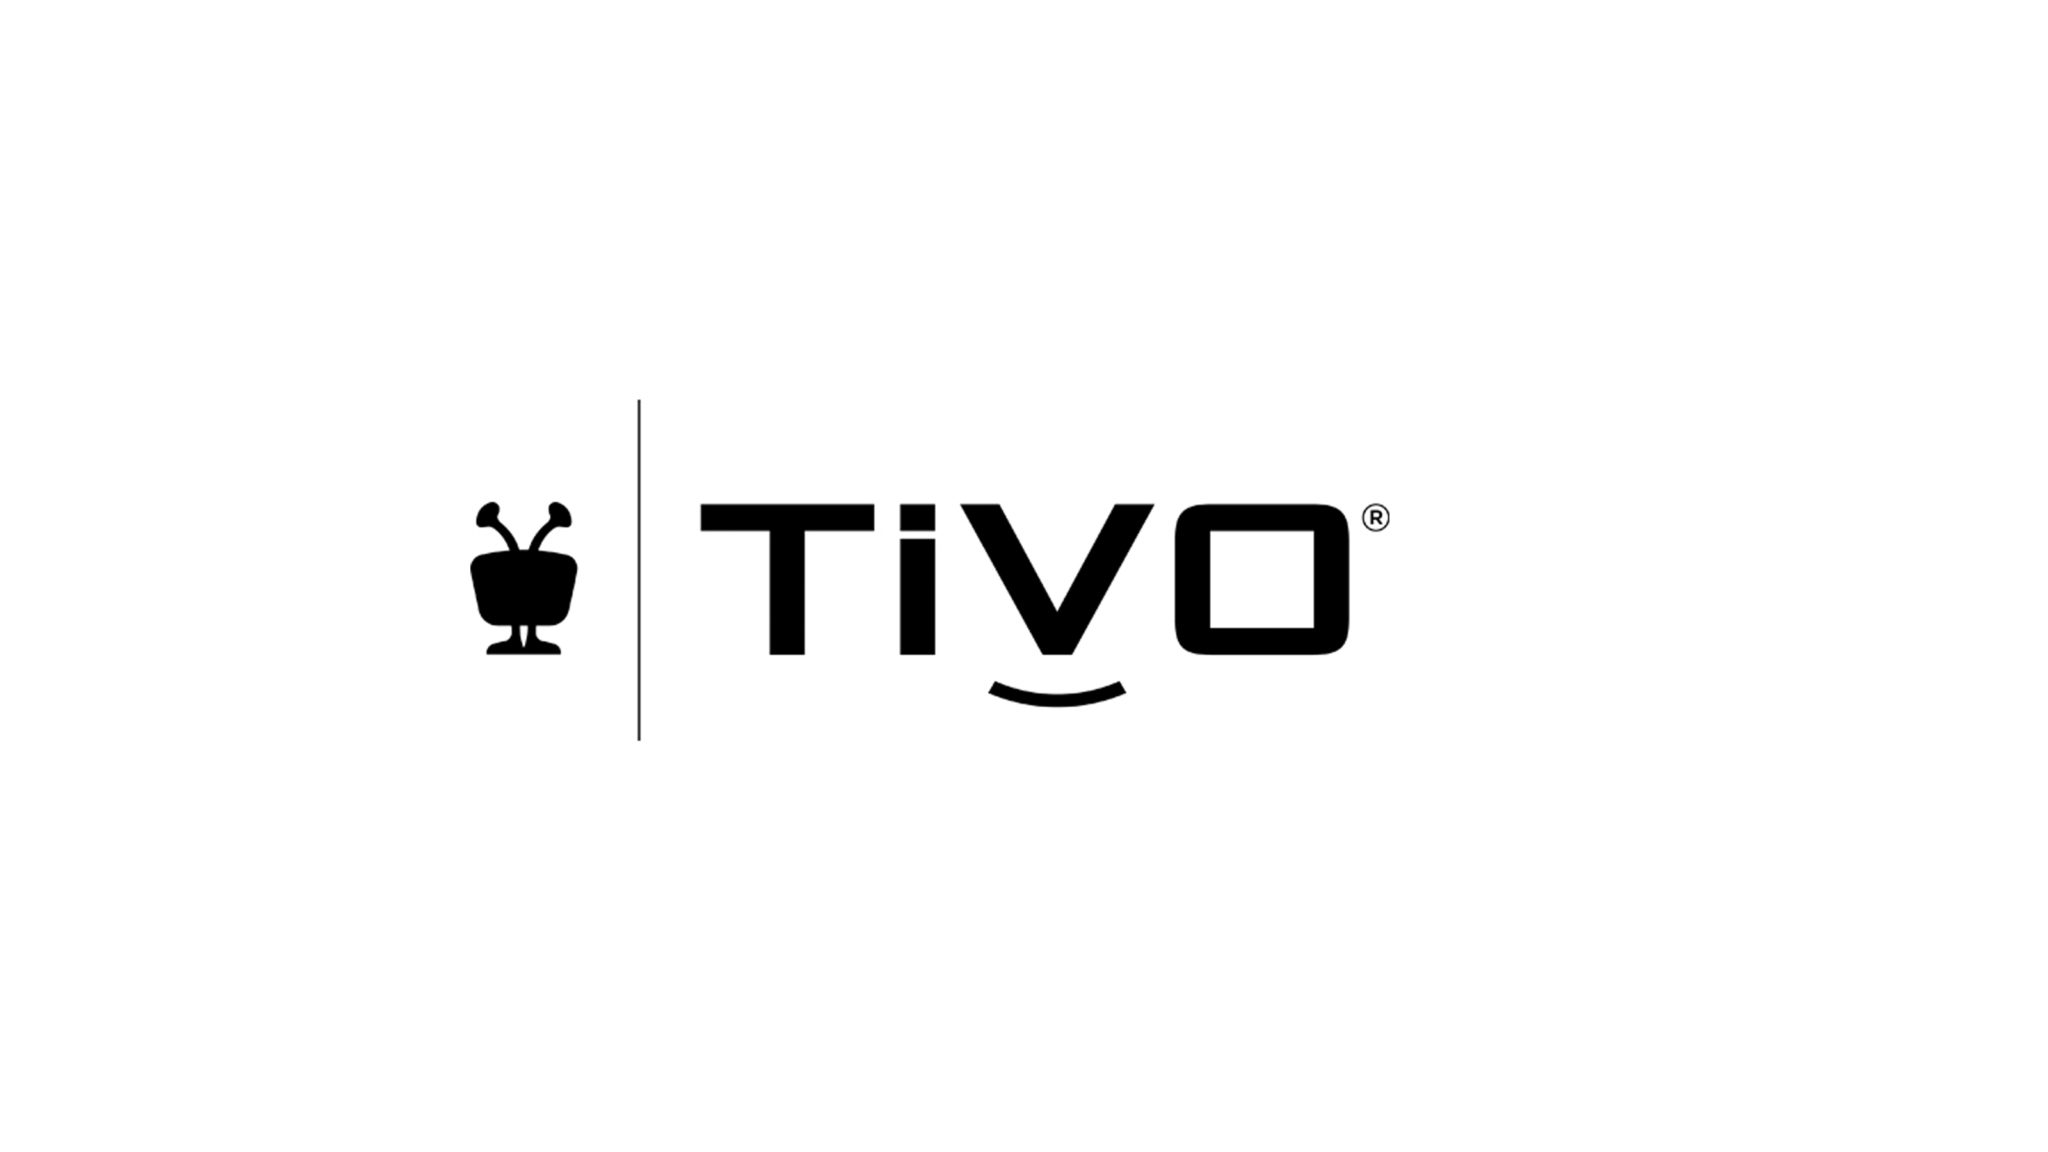 TiVo Introduces Match Scores to Help TiVo Users Choose a Streaming Service